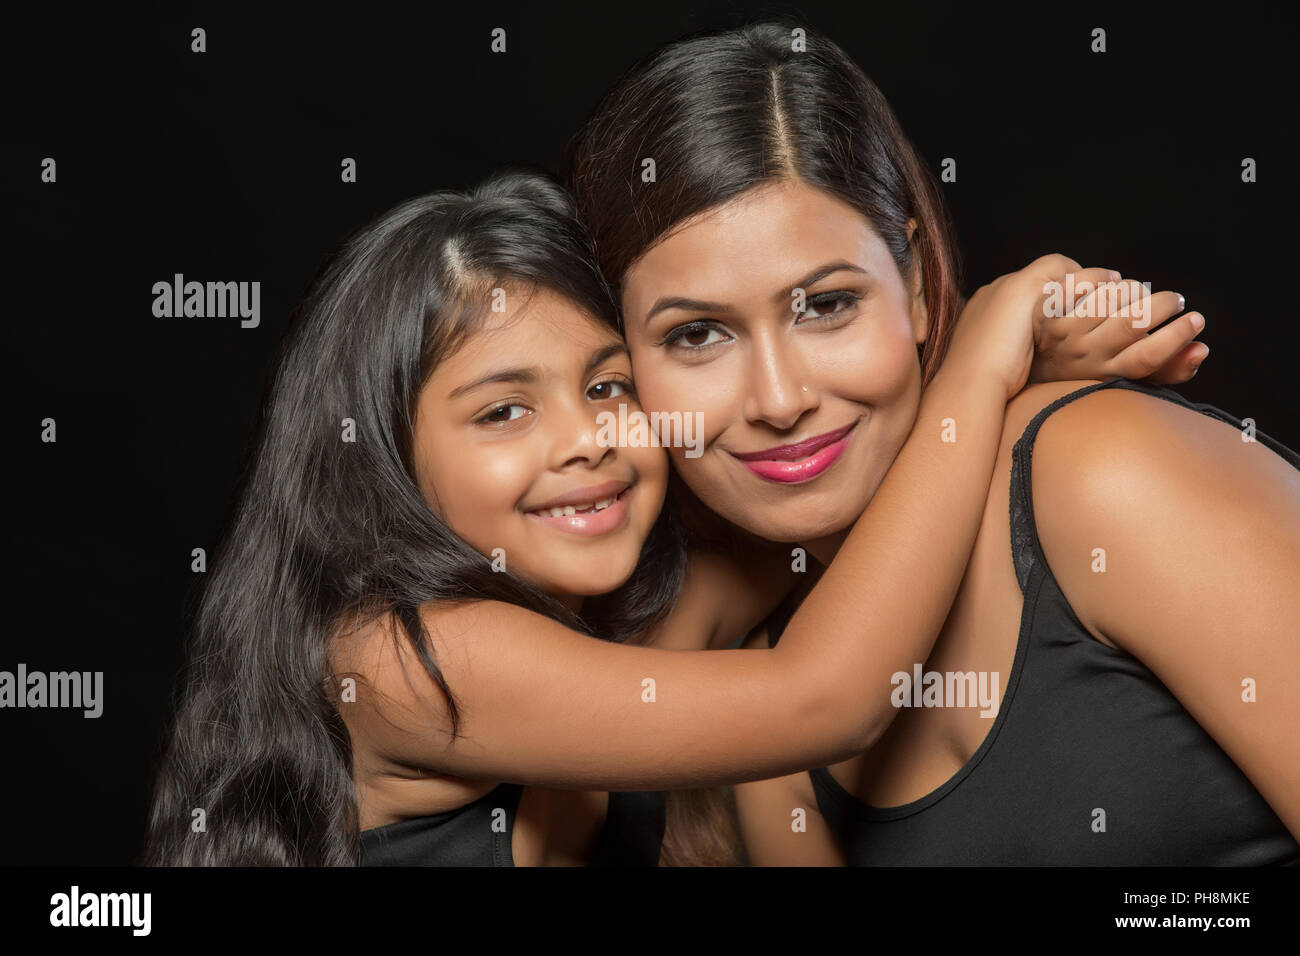 Portrait of smiling mother and daughter embracing Banque D'Images